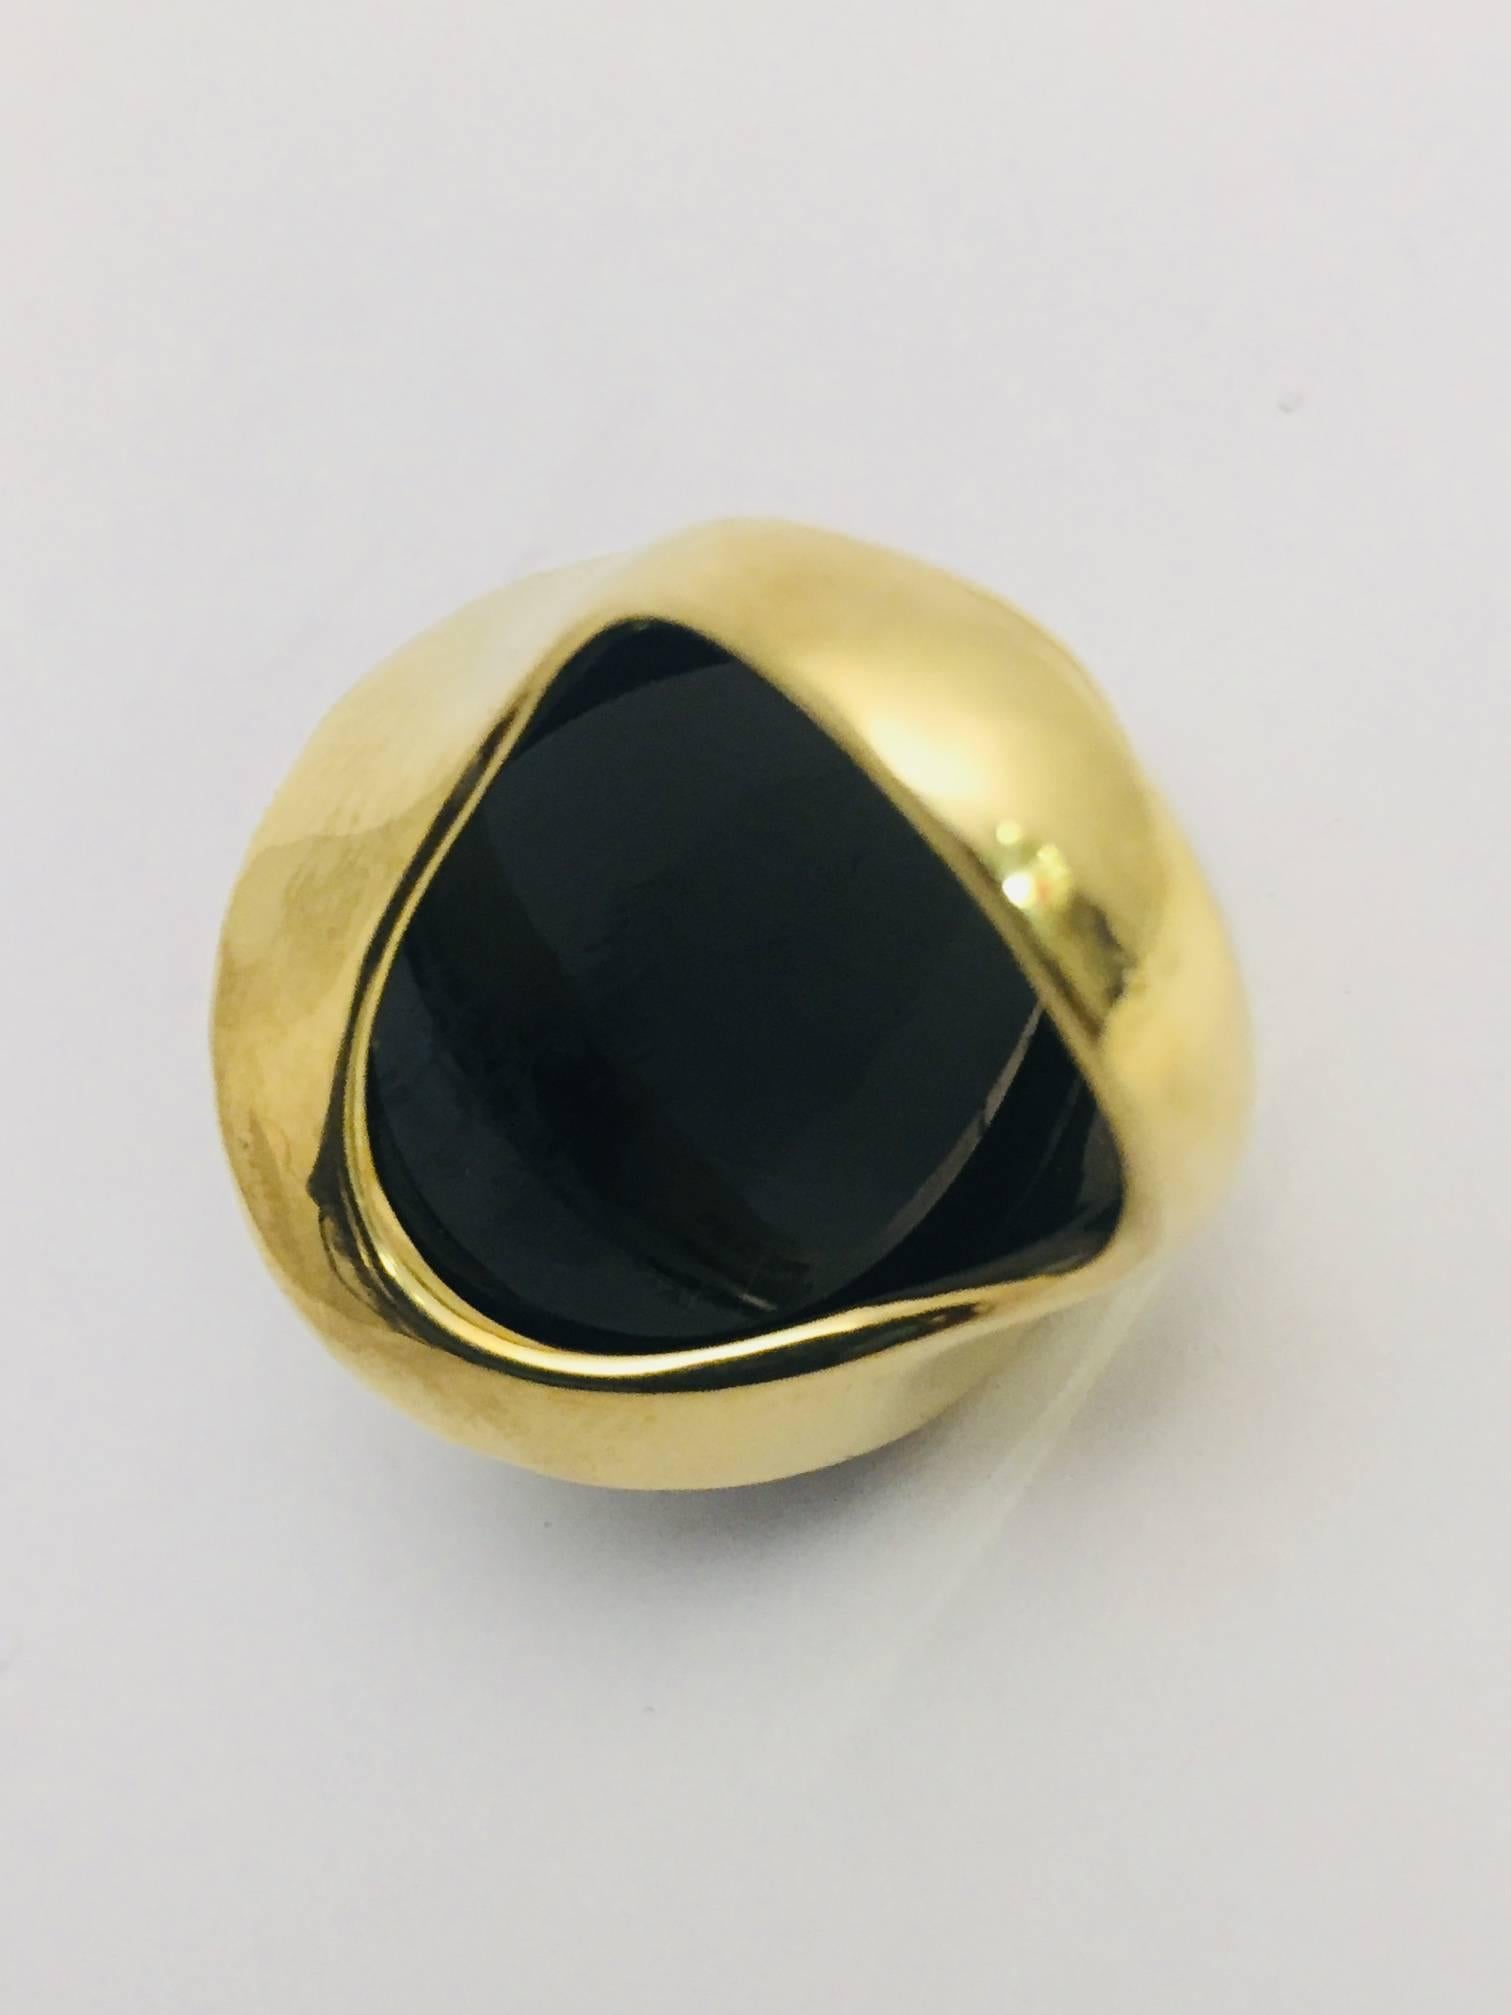 Regal Ippolita Onyx King Ring in 18 Karat Yellow Gold In New Condition For Sale In Palm Beach, FL